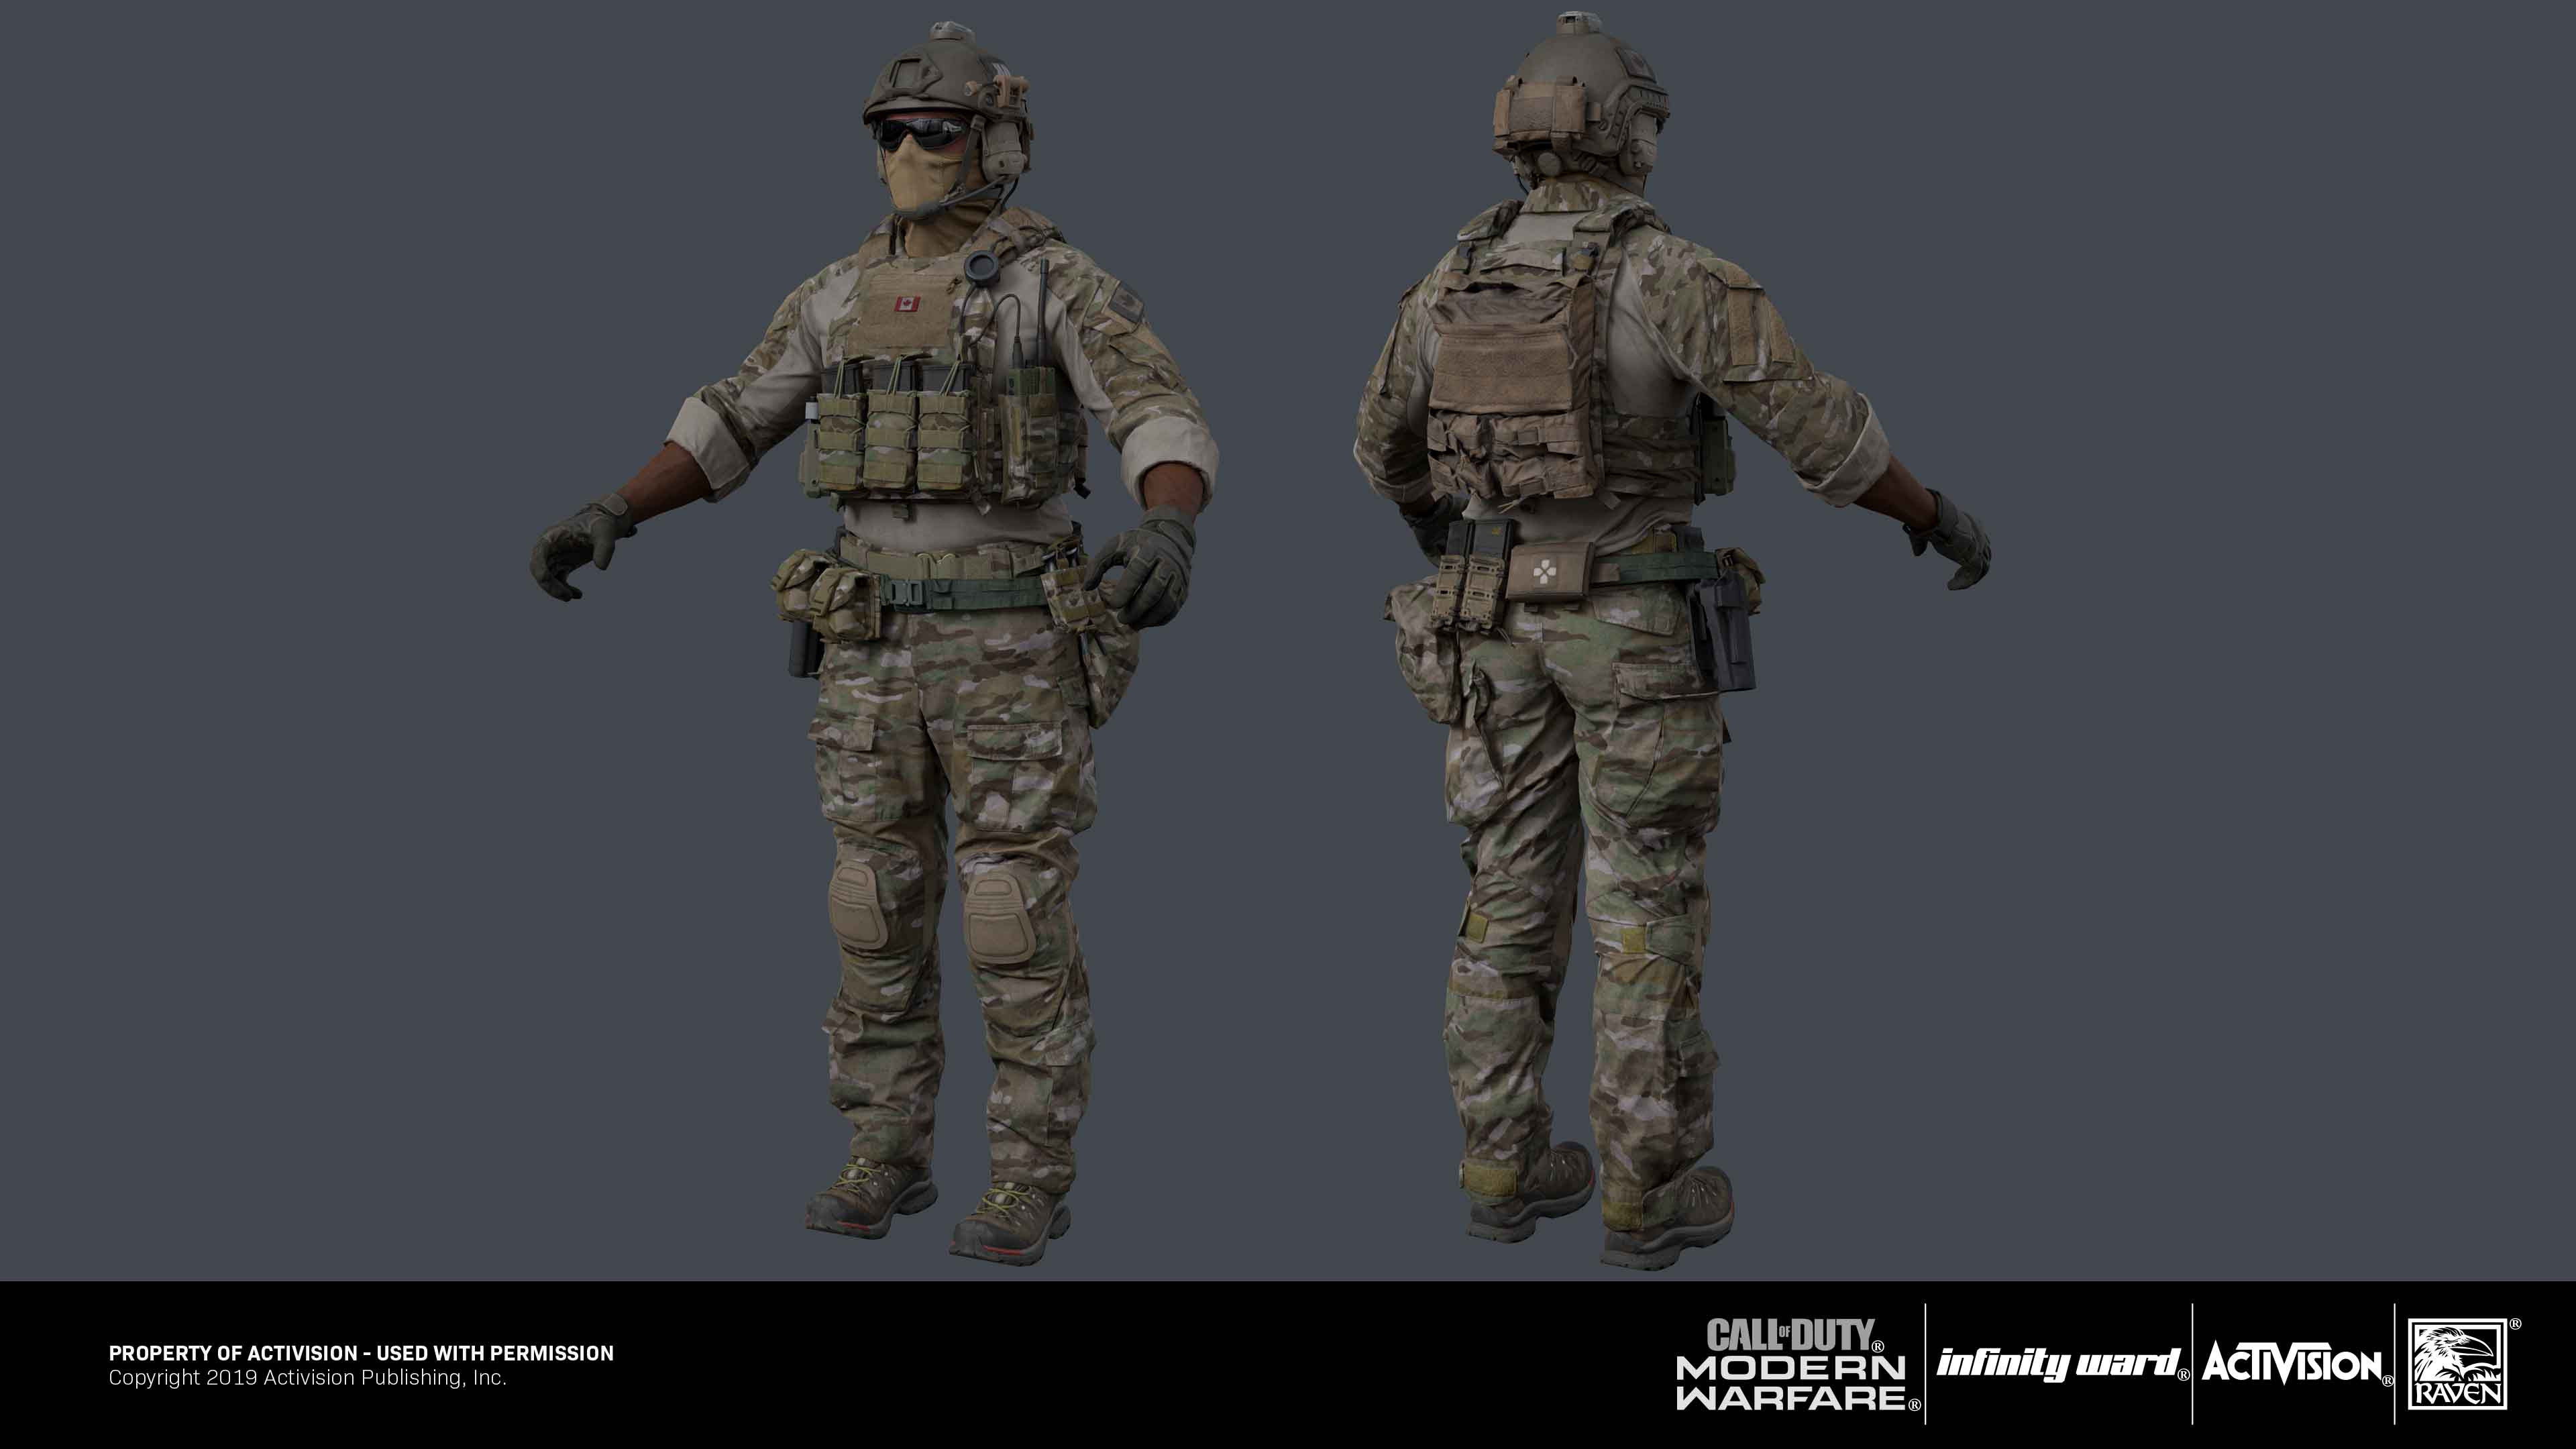 JTF skin: Responsible for modifying and re-texturing for existing parts to create skins. (Existing parts used were created by various Artist)